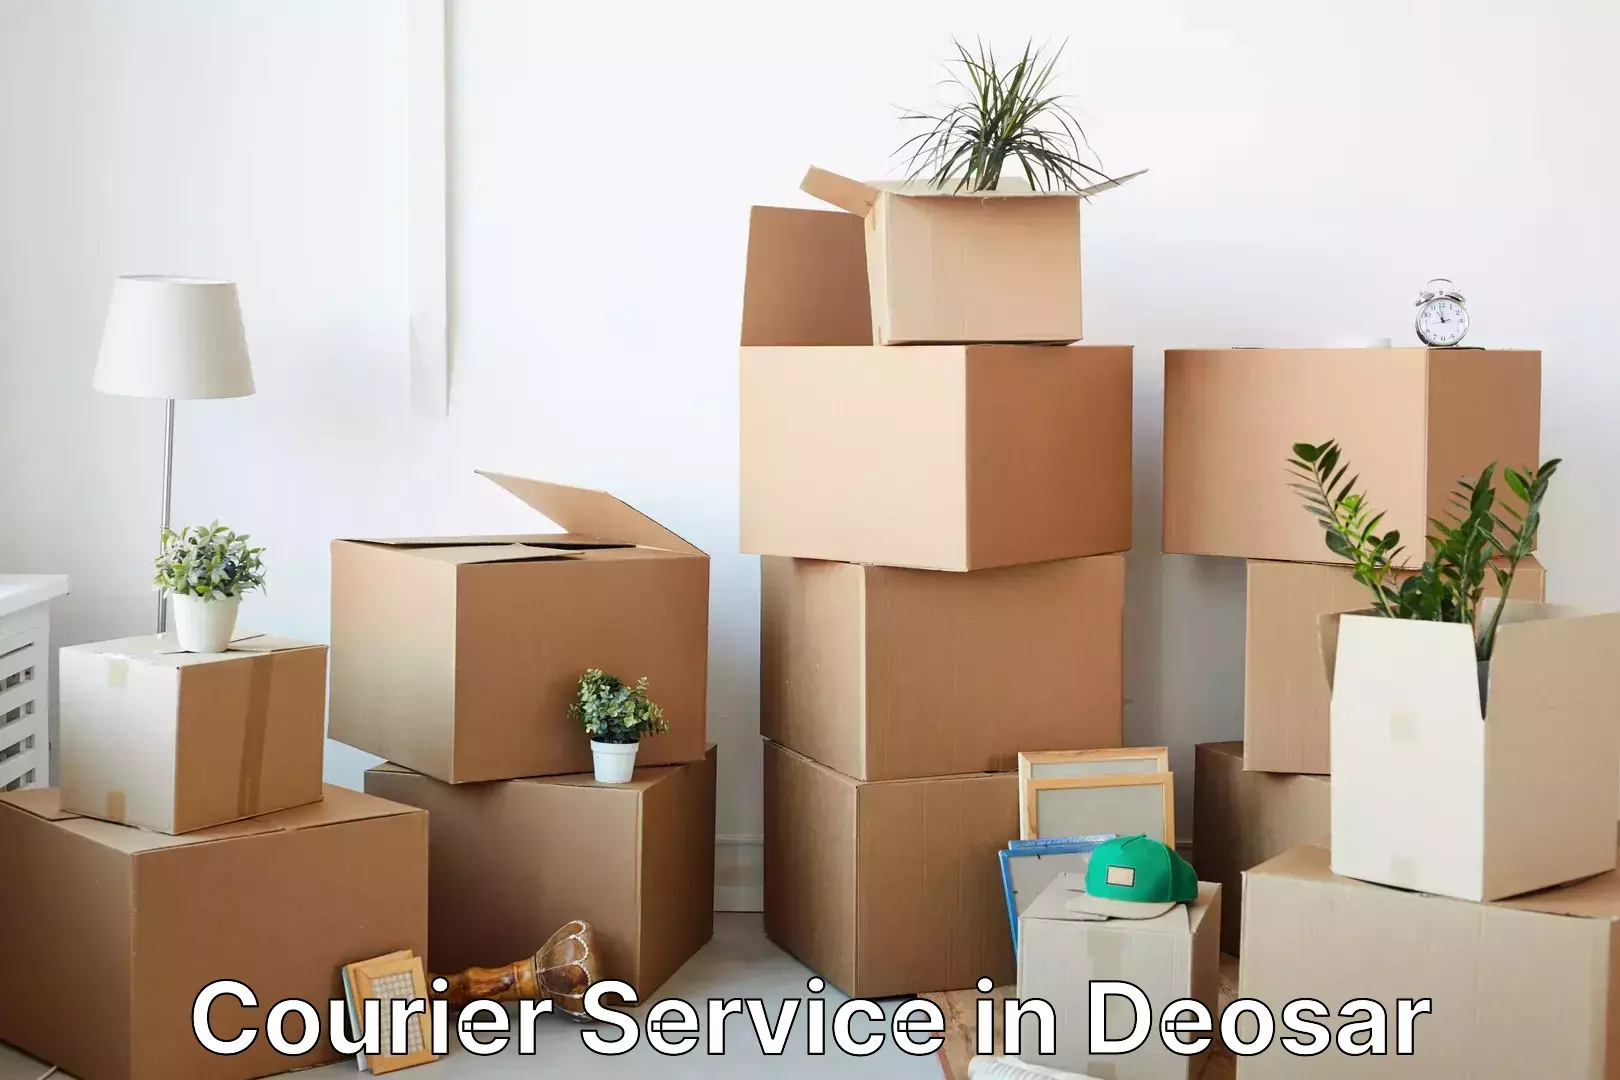 Courier dispatch services in Deosar